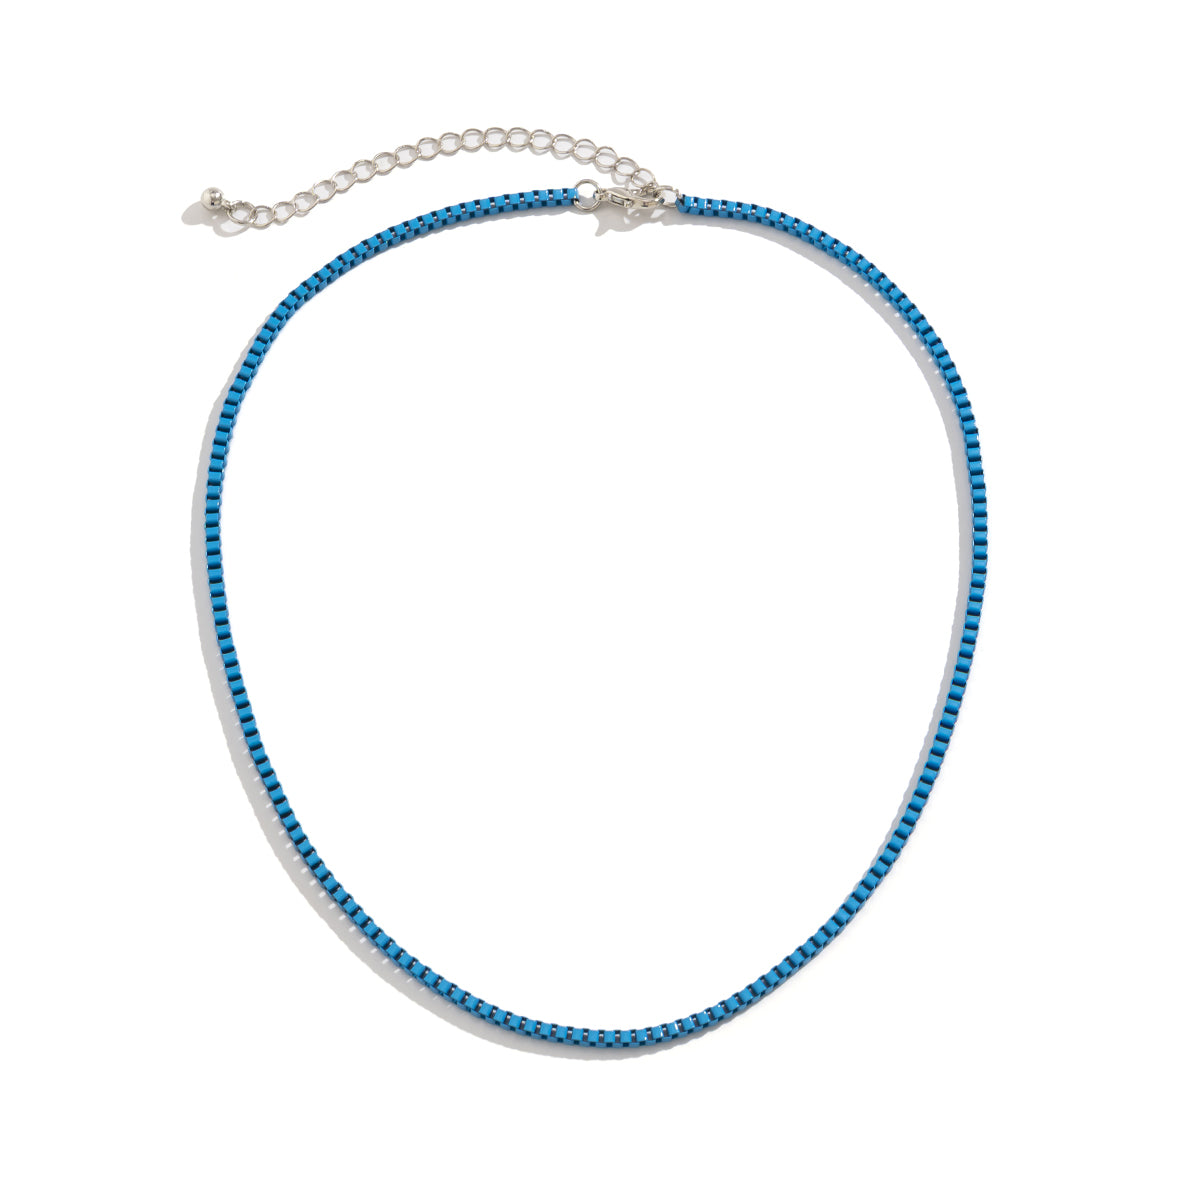 Blue Enamel & Silver-Plated Box Chain Necklace